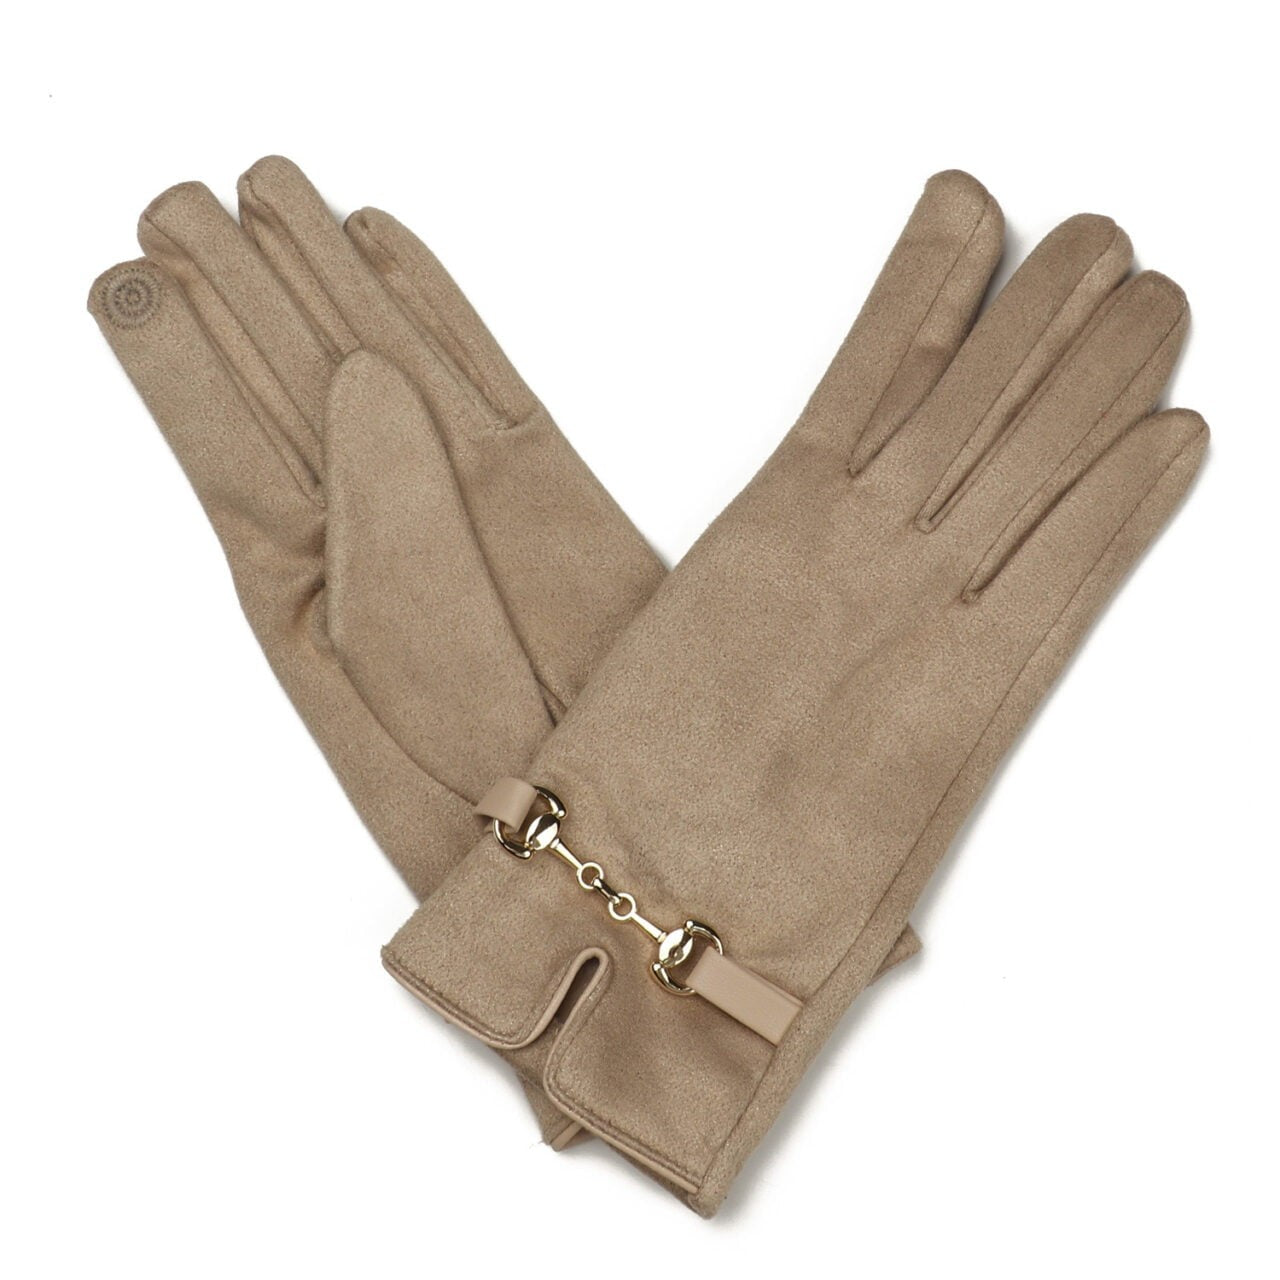 Zelly Faux Suede Gloves Cream